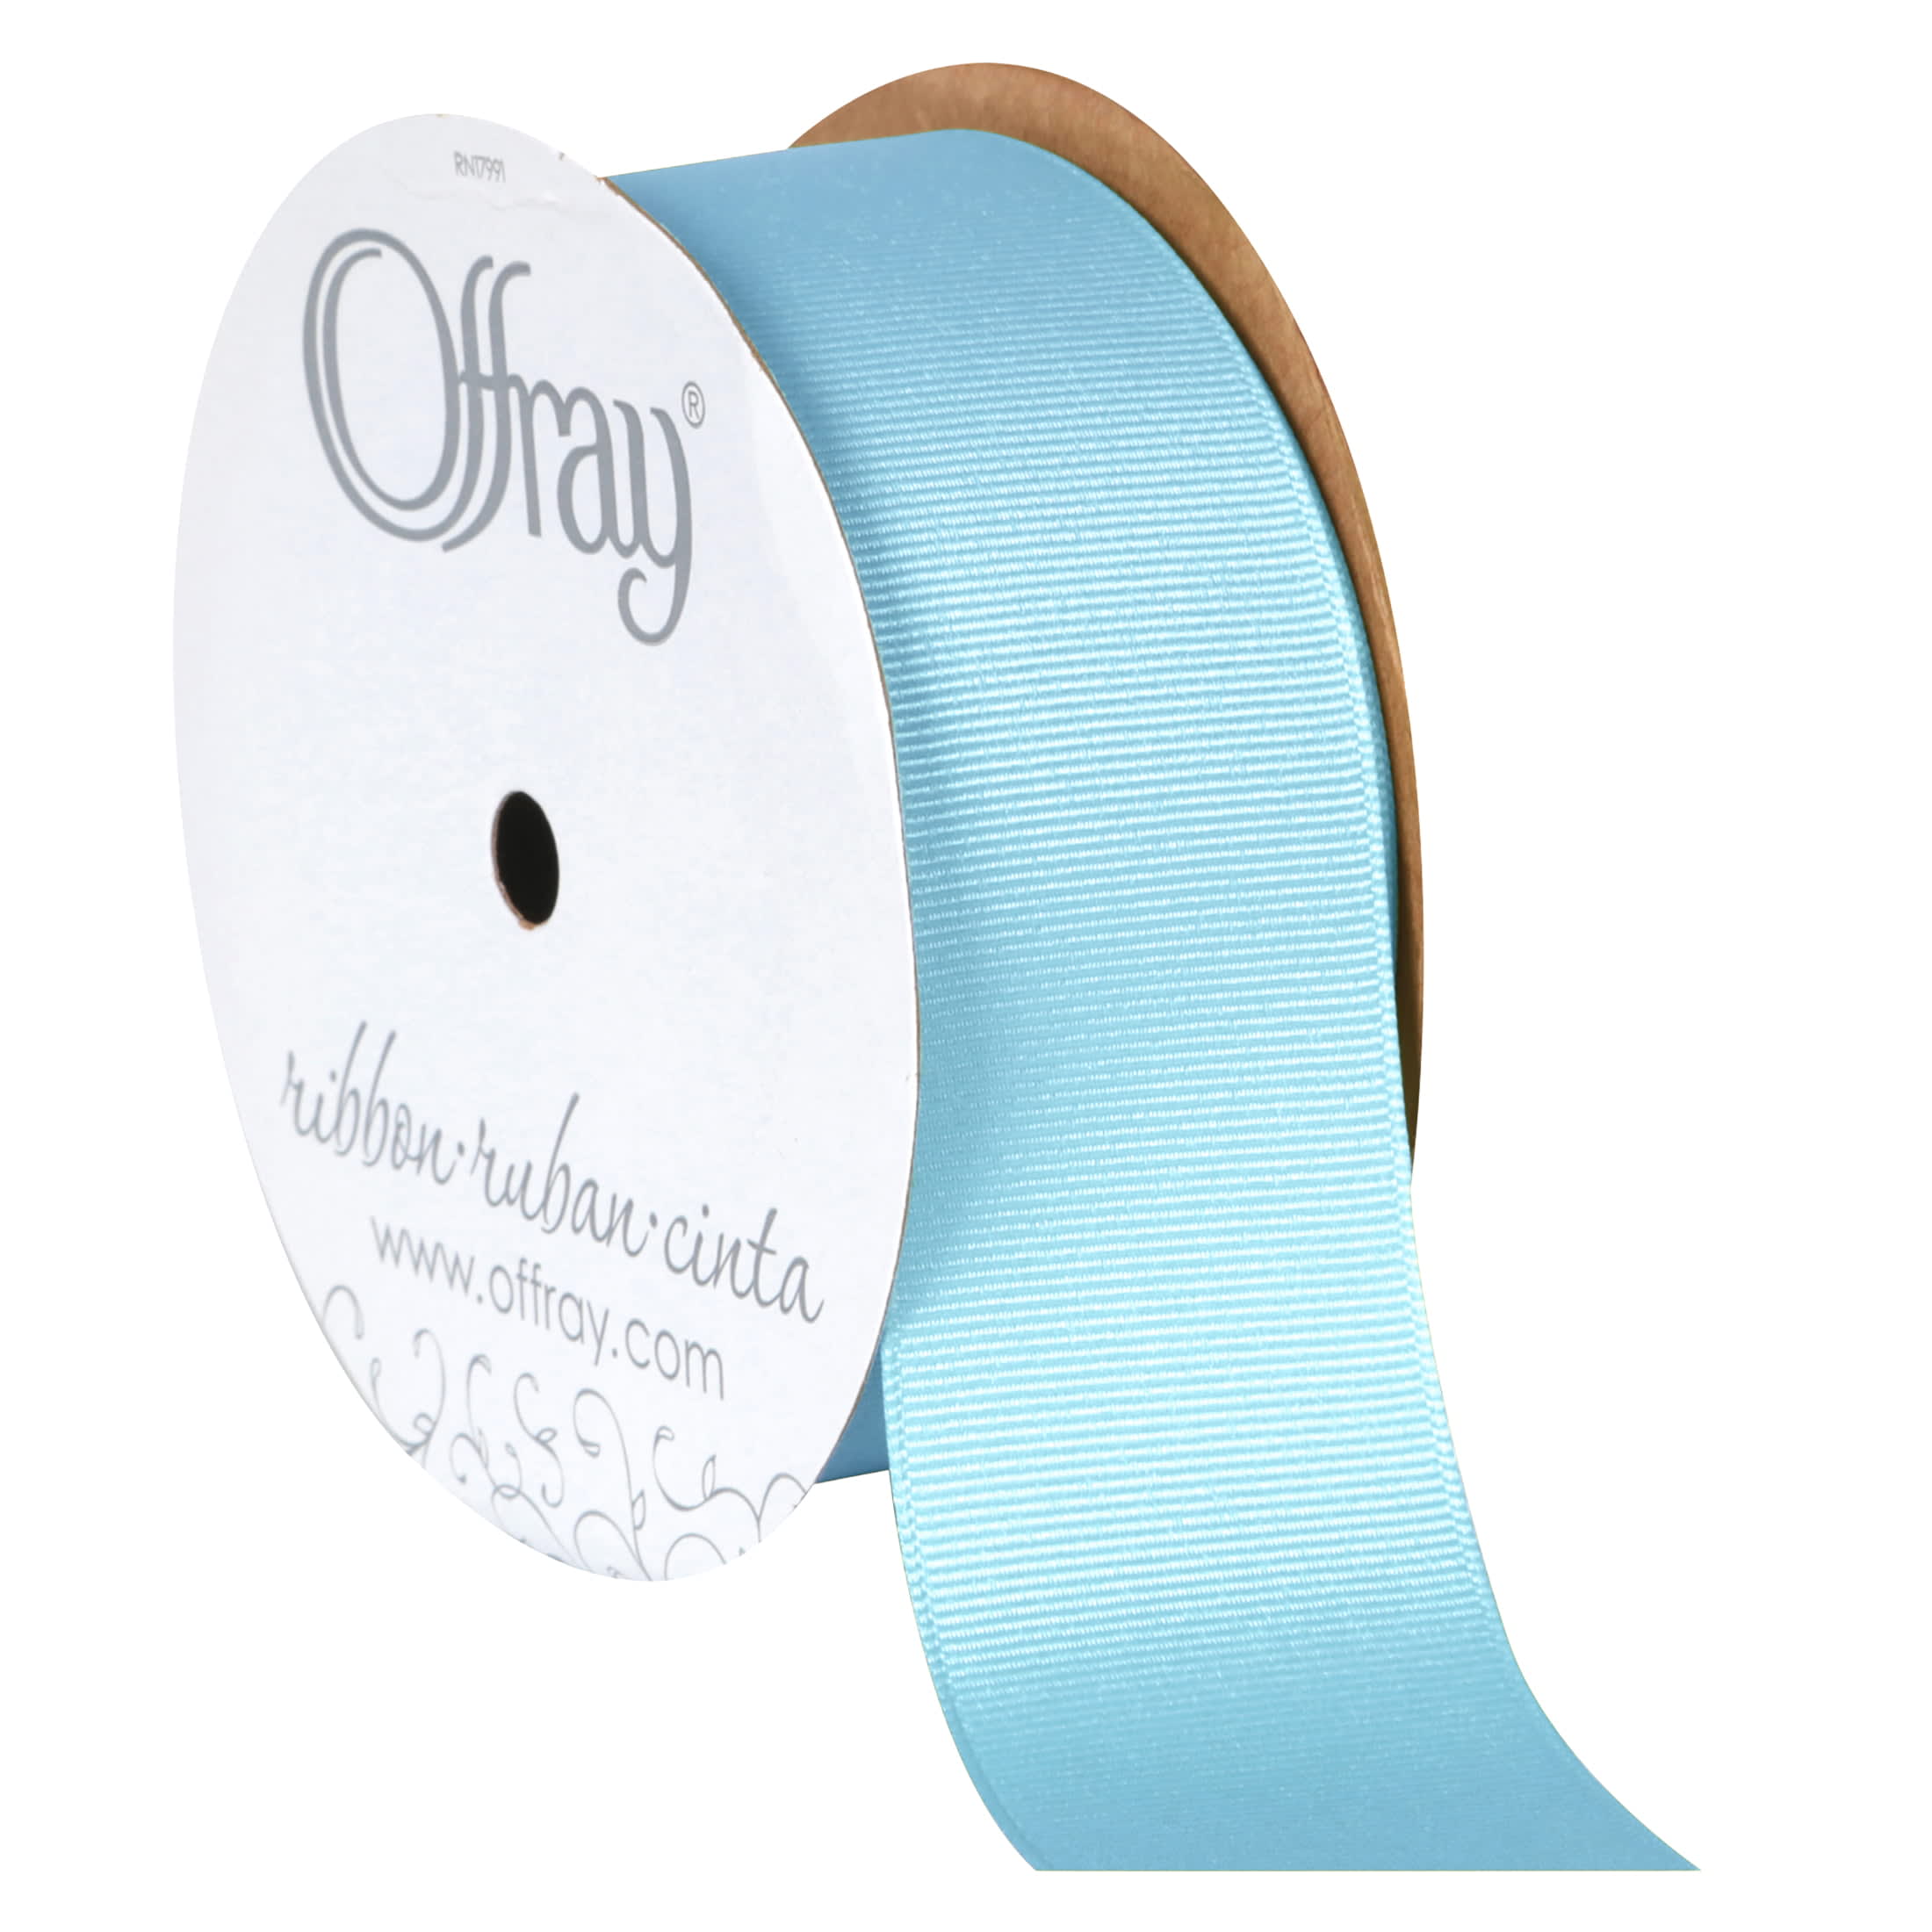 Offray Ribbon, Emerald Green 1 1/2 inch Single Face Satin Polyester Ribbon,  12 feet - DroneUp Delivery